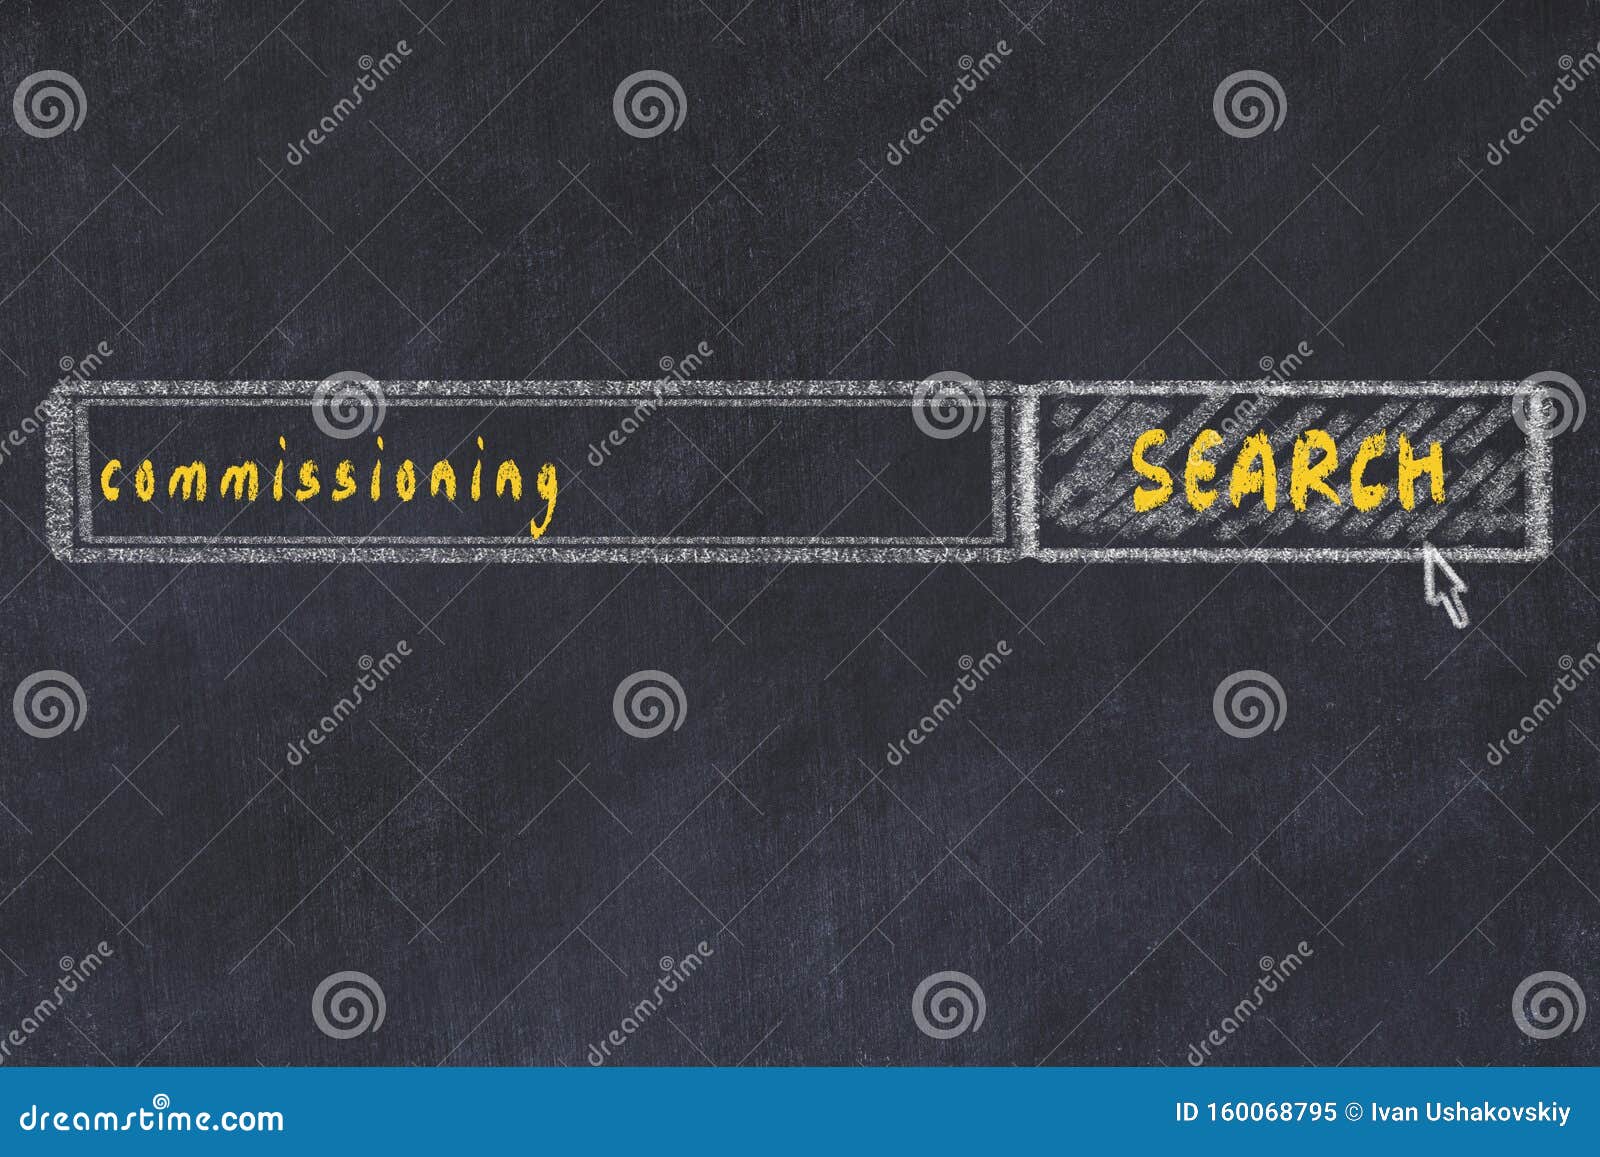 chalkboard drawing of search browser window and inscription commissioning